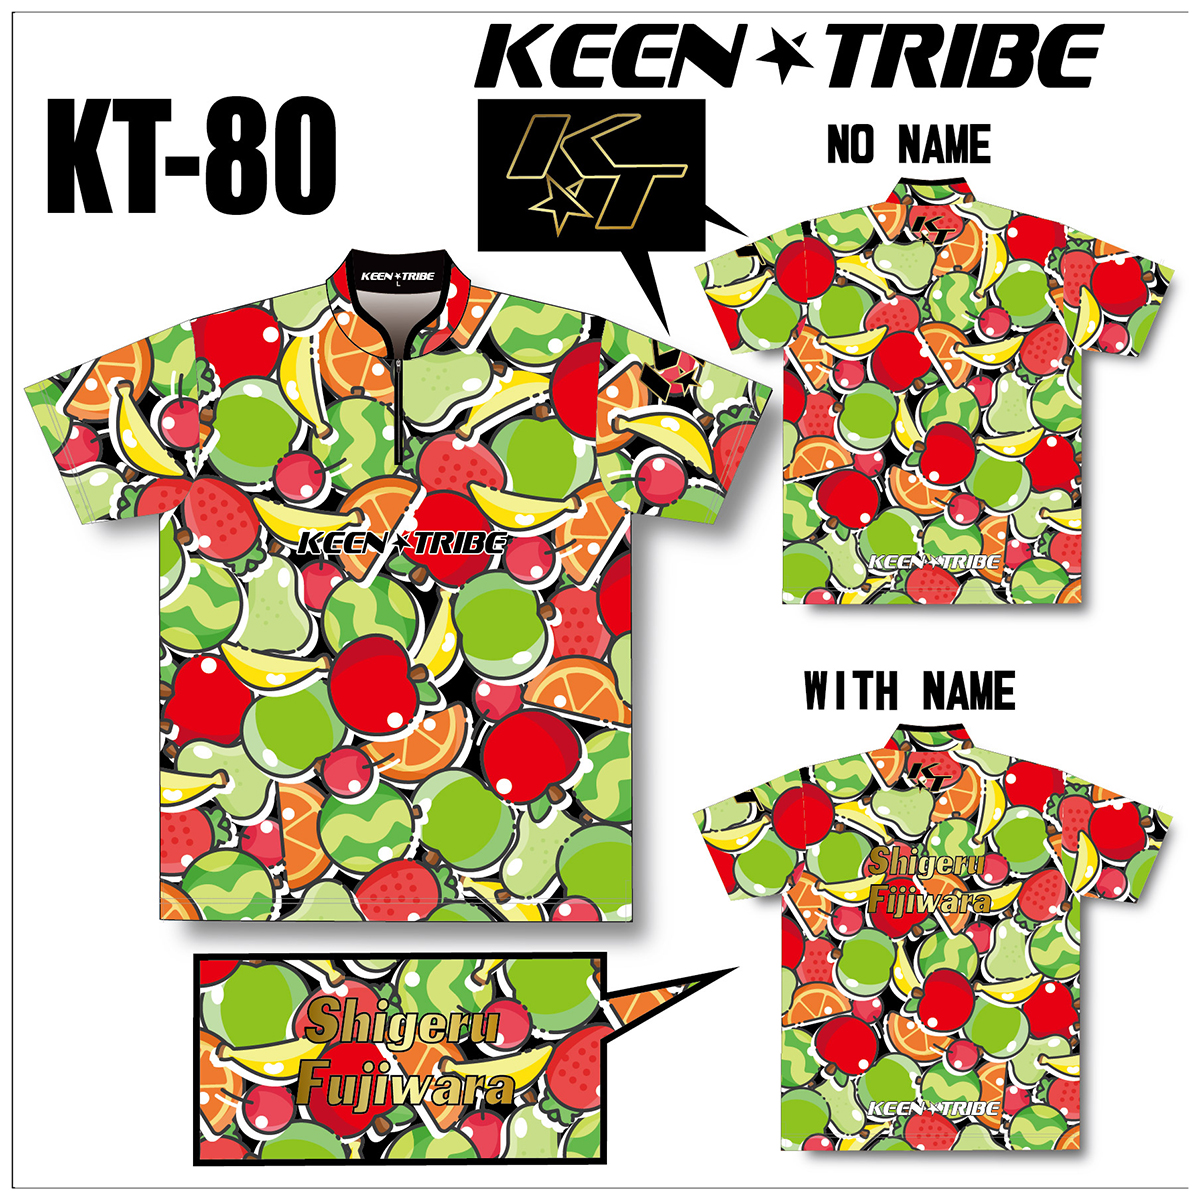 KEEN ★ TRIBE　KT-80(受注生産)